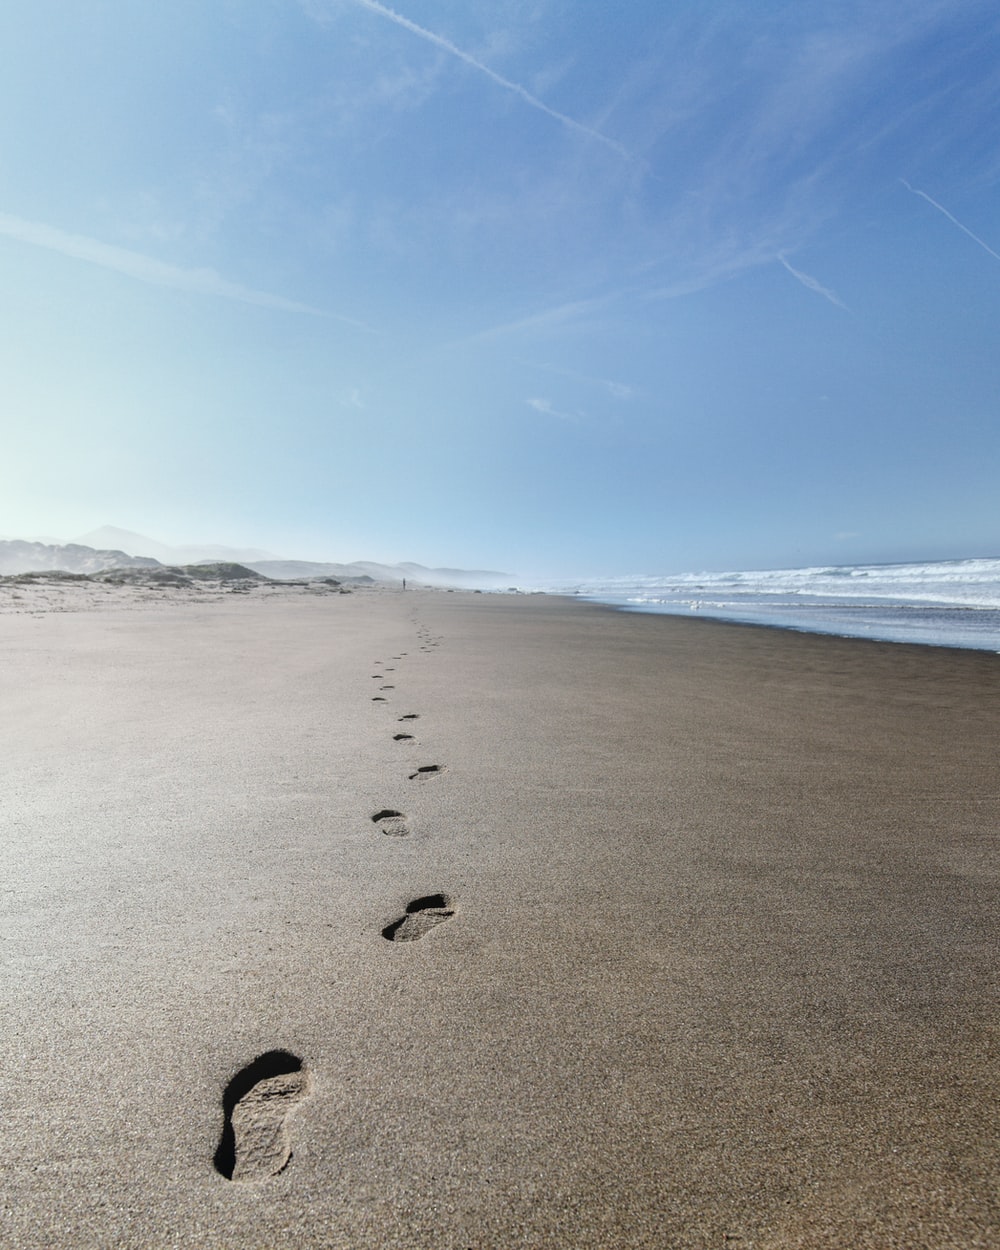 Footprints In The Sand Picture. Download Free Image